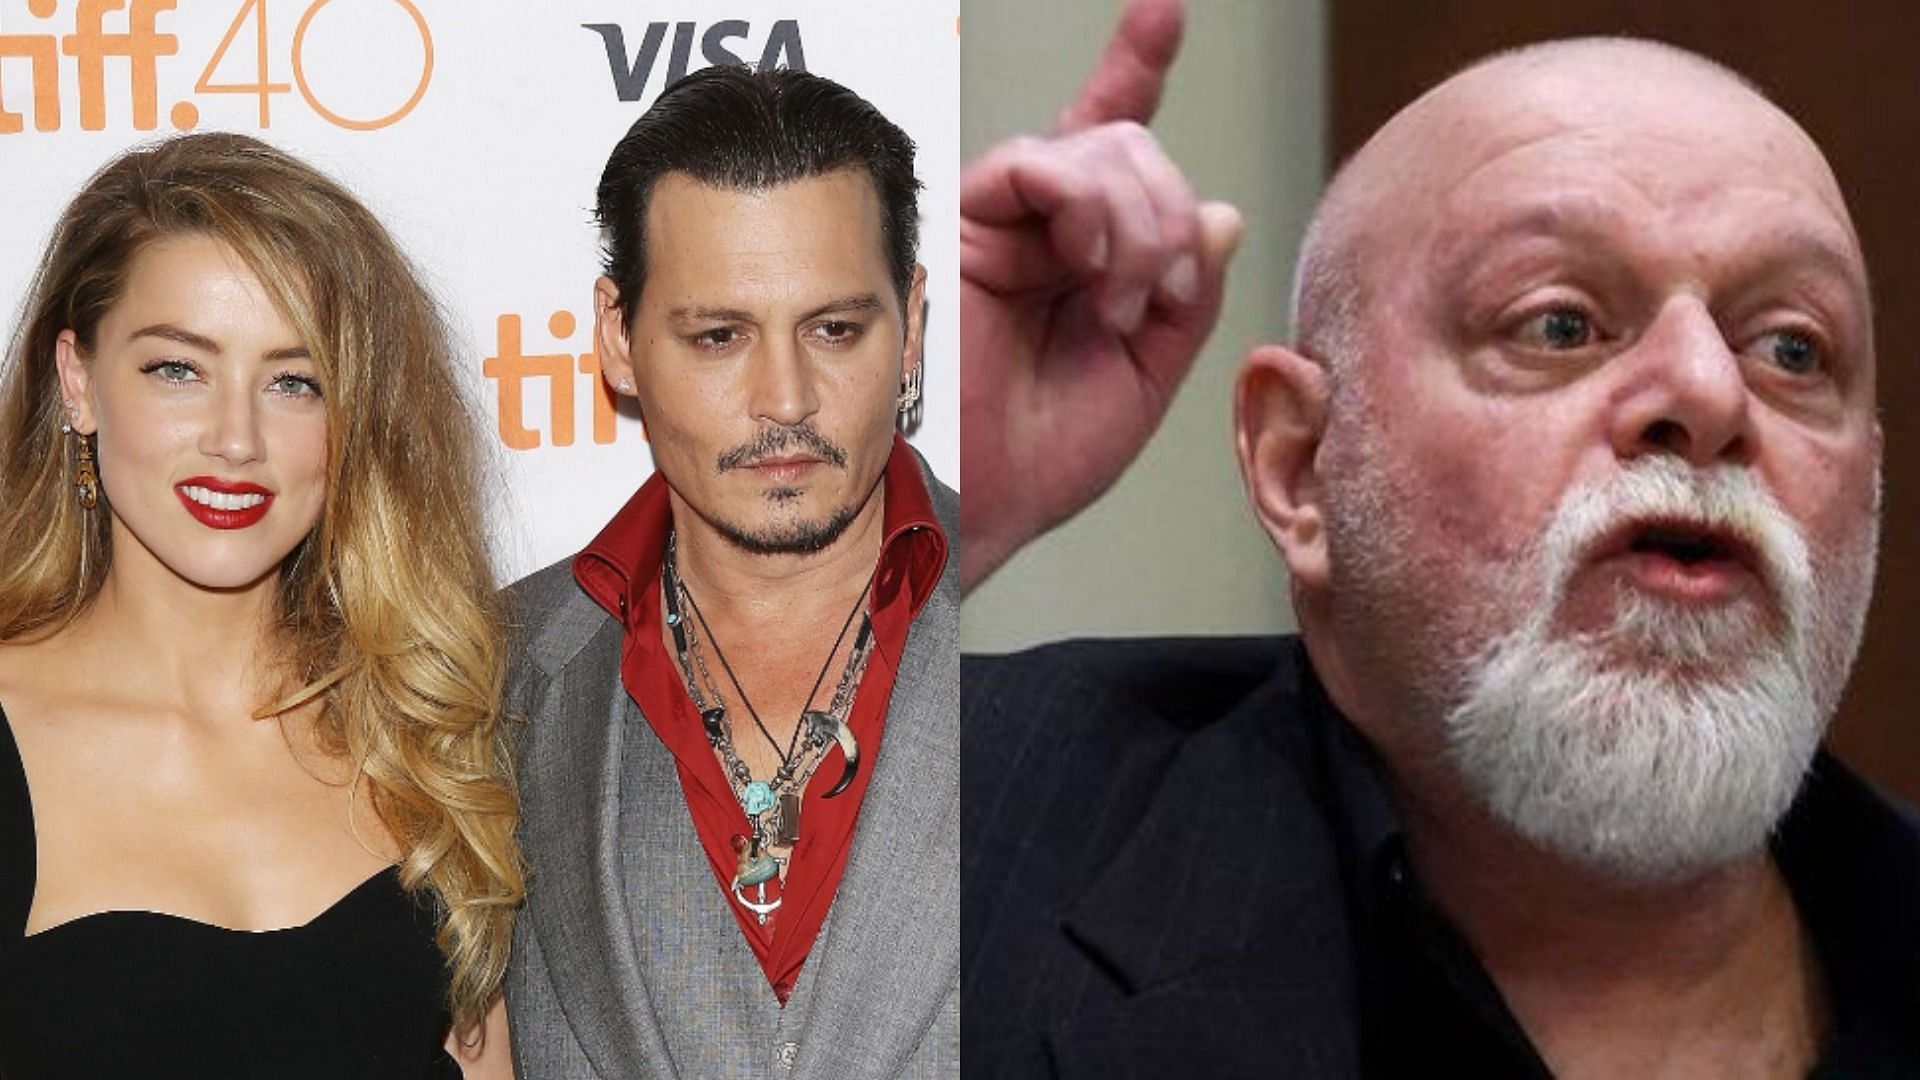 Johnny Depp&#039;s friend Isaac Baruch said he did not see any bruises on Amber Heard after meeting her post the former&#039;s alleged 2016 attack (Image via Michael Tran/Getty Images and YouTube/ Law &amp; Crime Network)